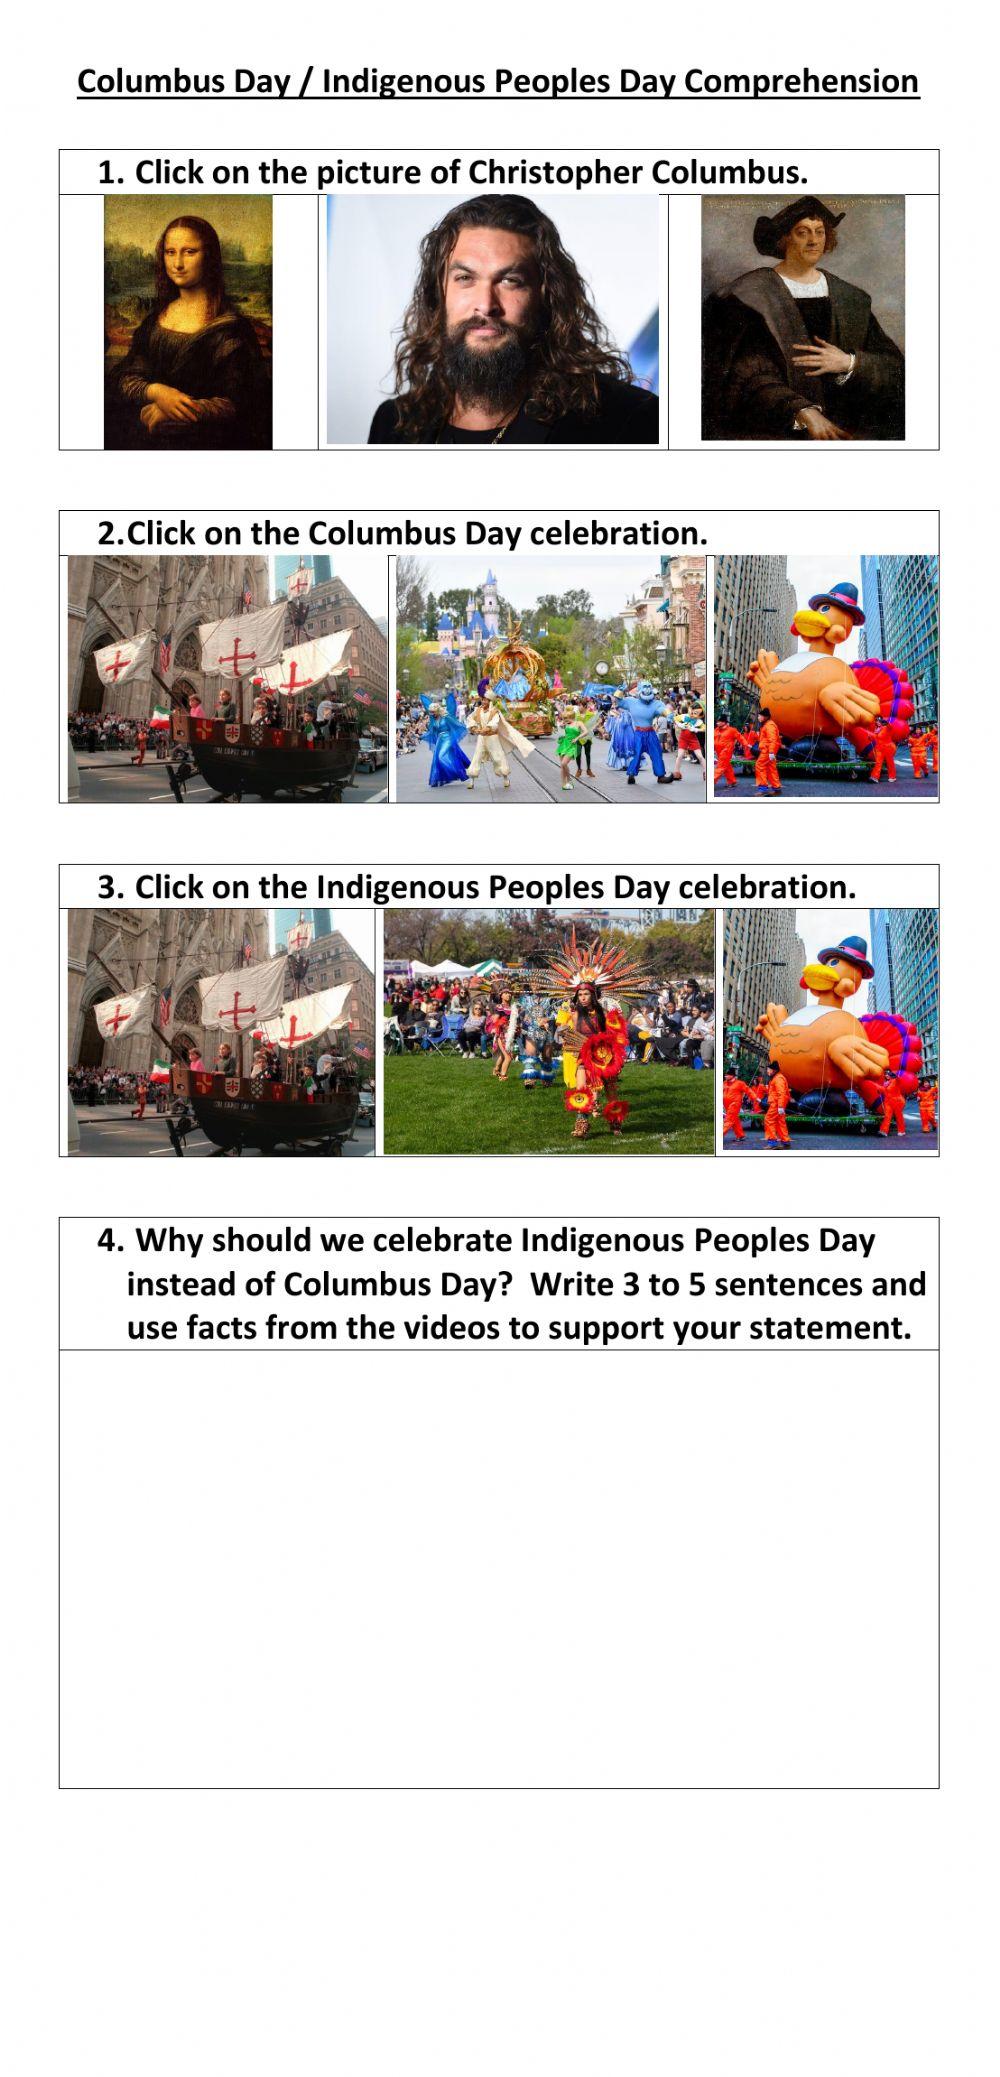 Columbus-Indigenous Peoples Day